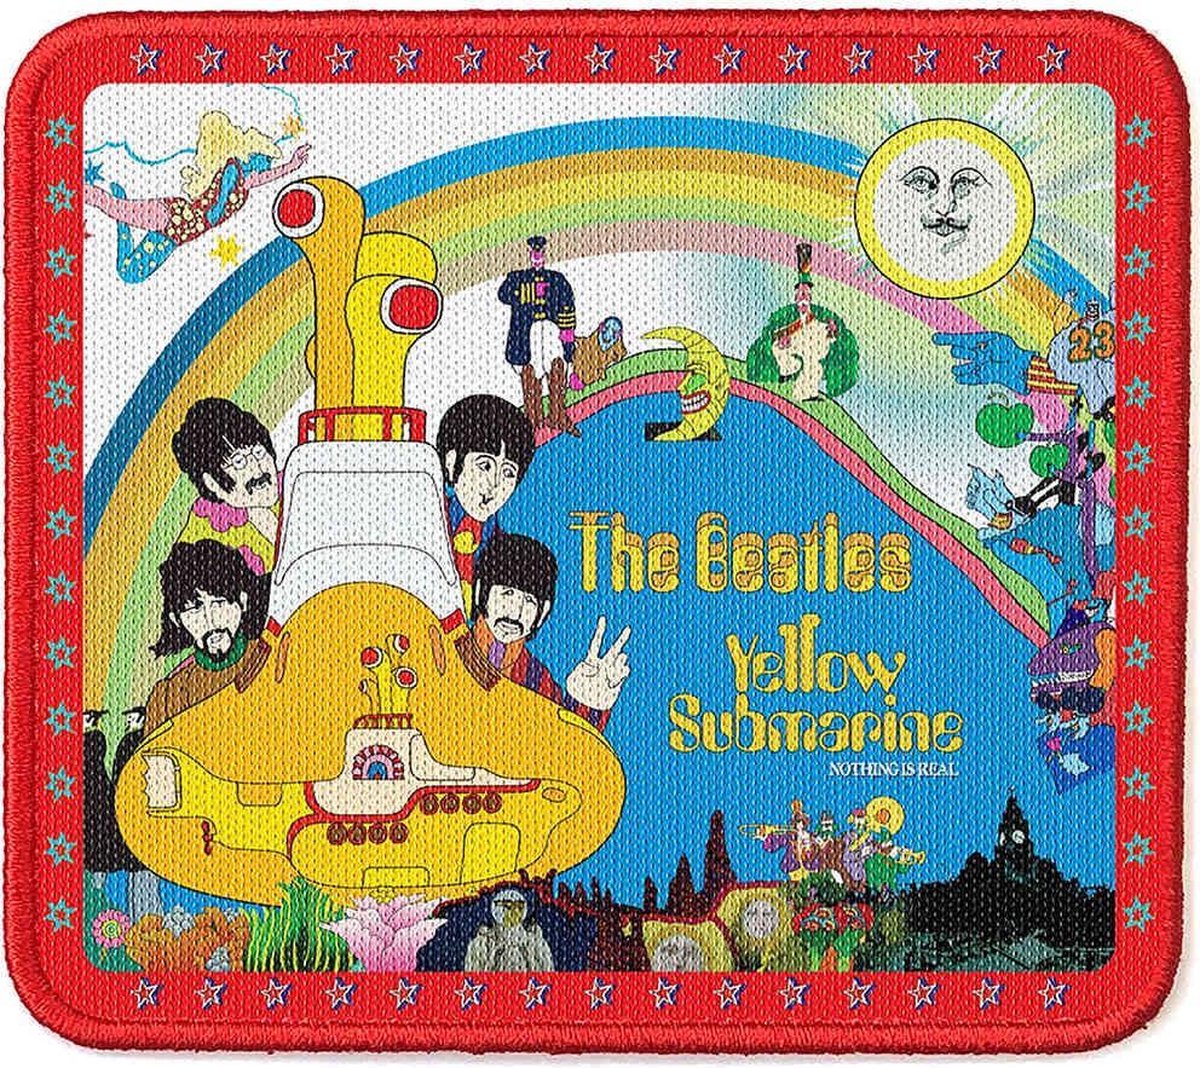 Afbeelding van product Rock Off  The Beatles Patch Yellow Submarine Stars Border Multicolours